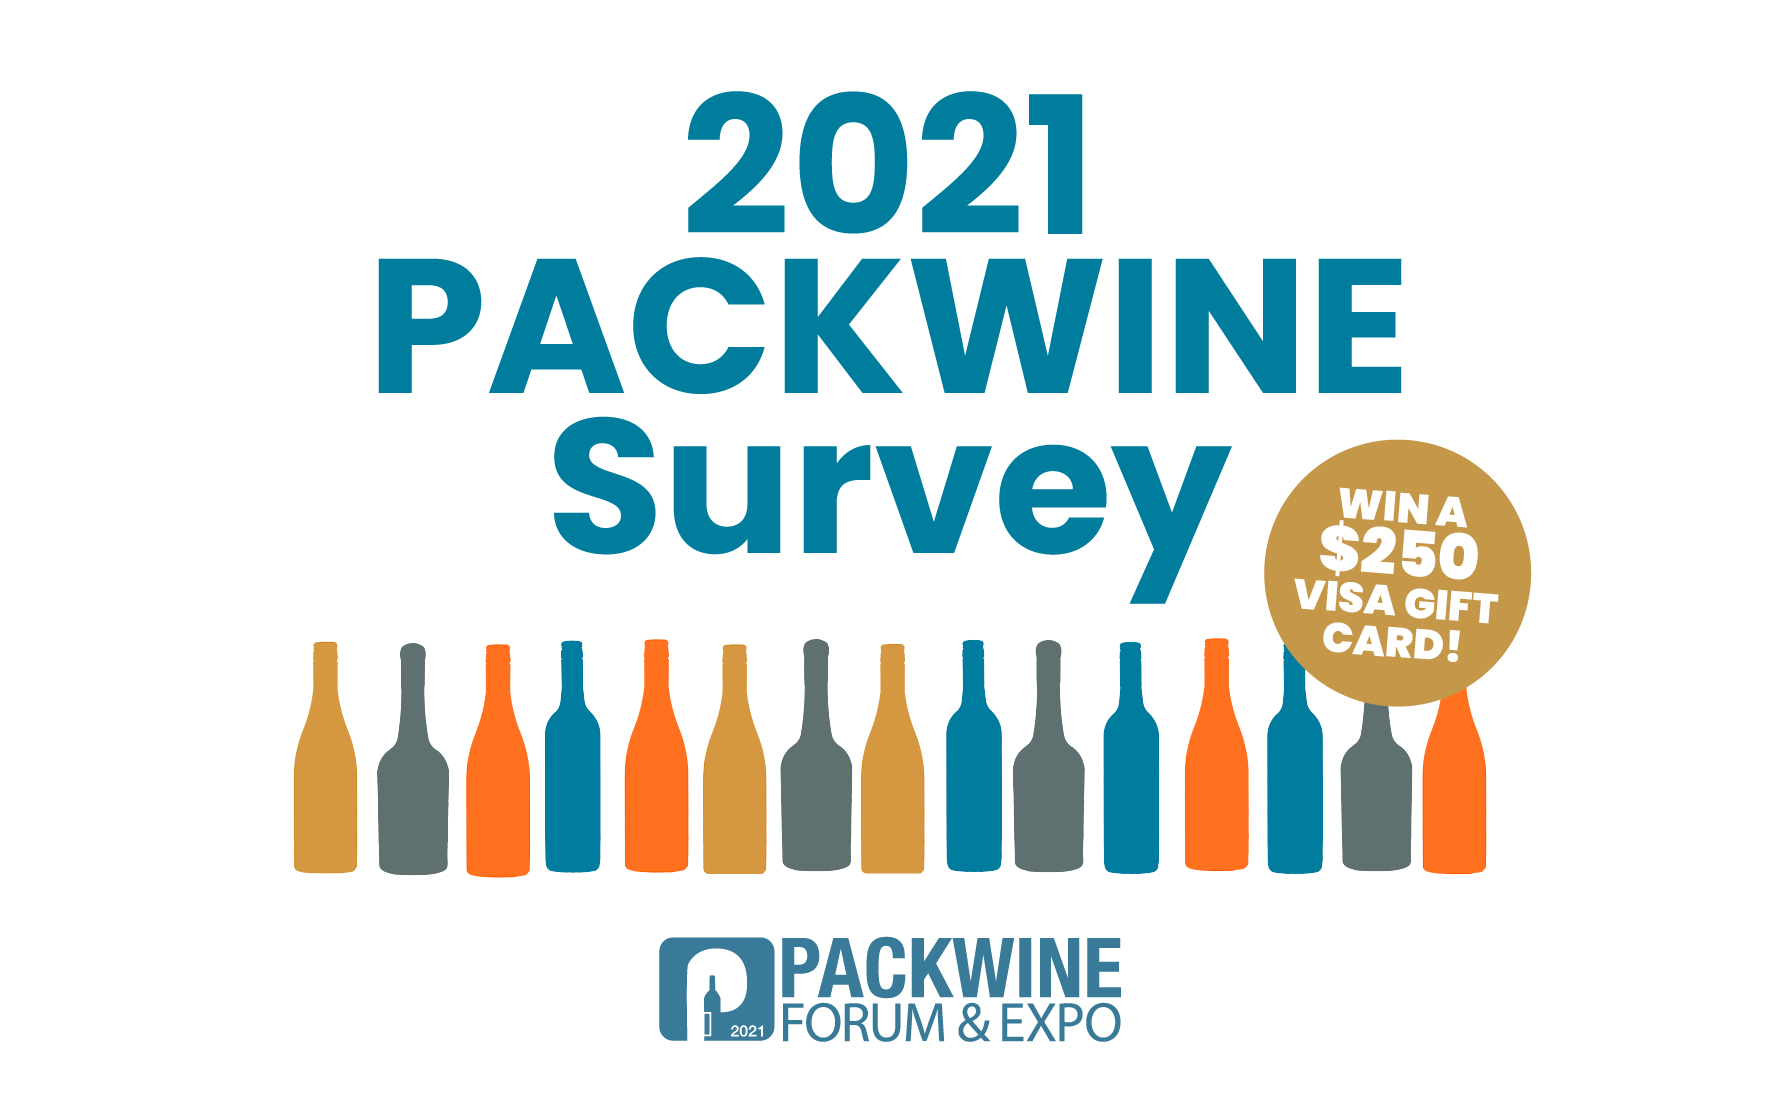 Your wine packaging insights sought for survey – with a chance to win a $250 gift card*!